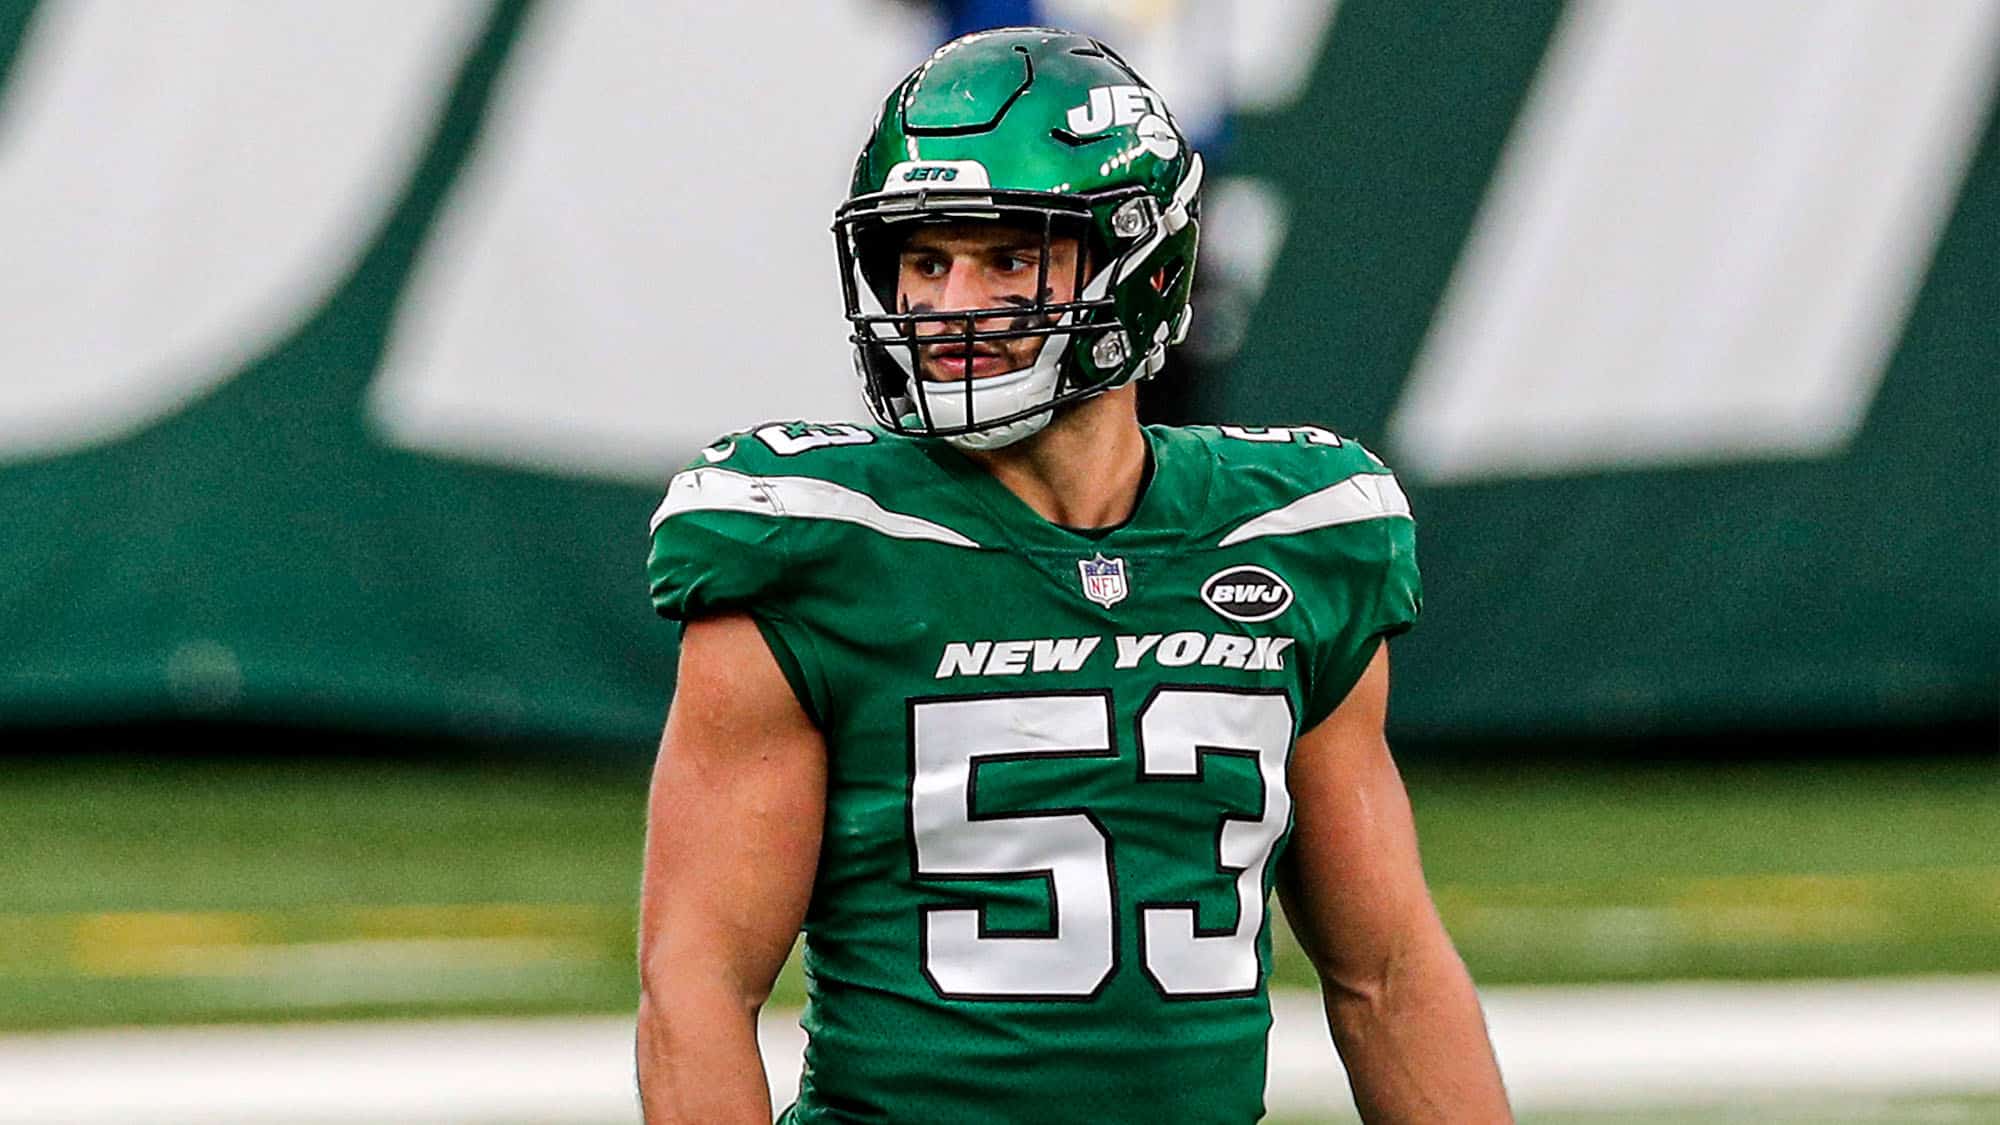 Blake Cashman's stats and film let us know whether he is ready to win the NY Jets' LB3 job in 2021.